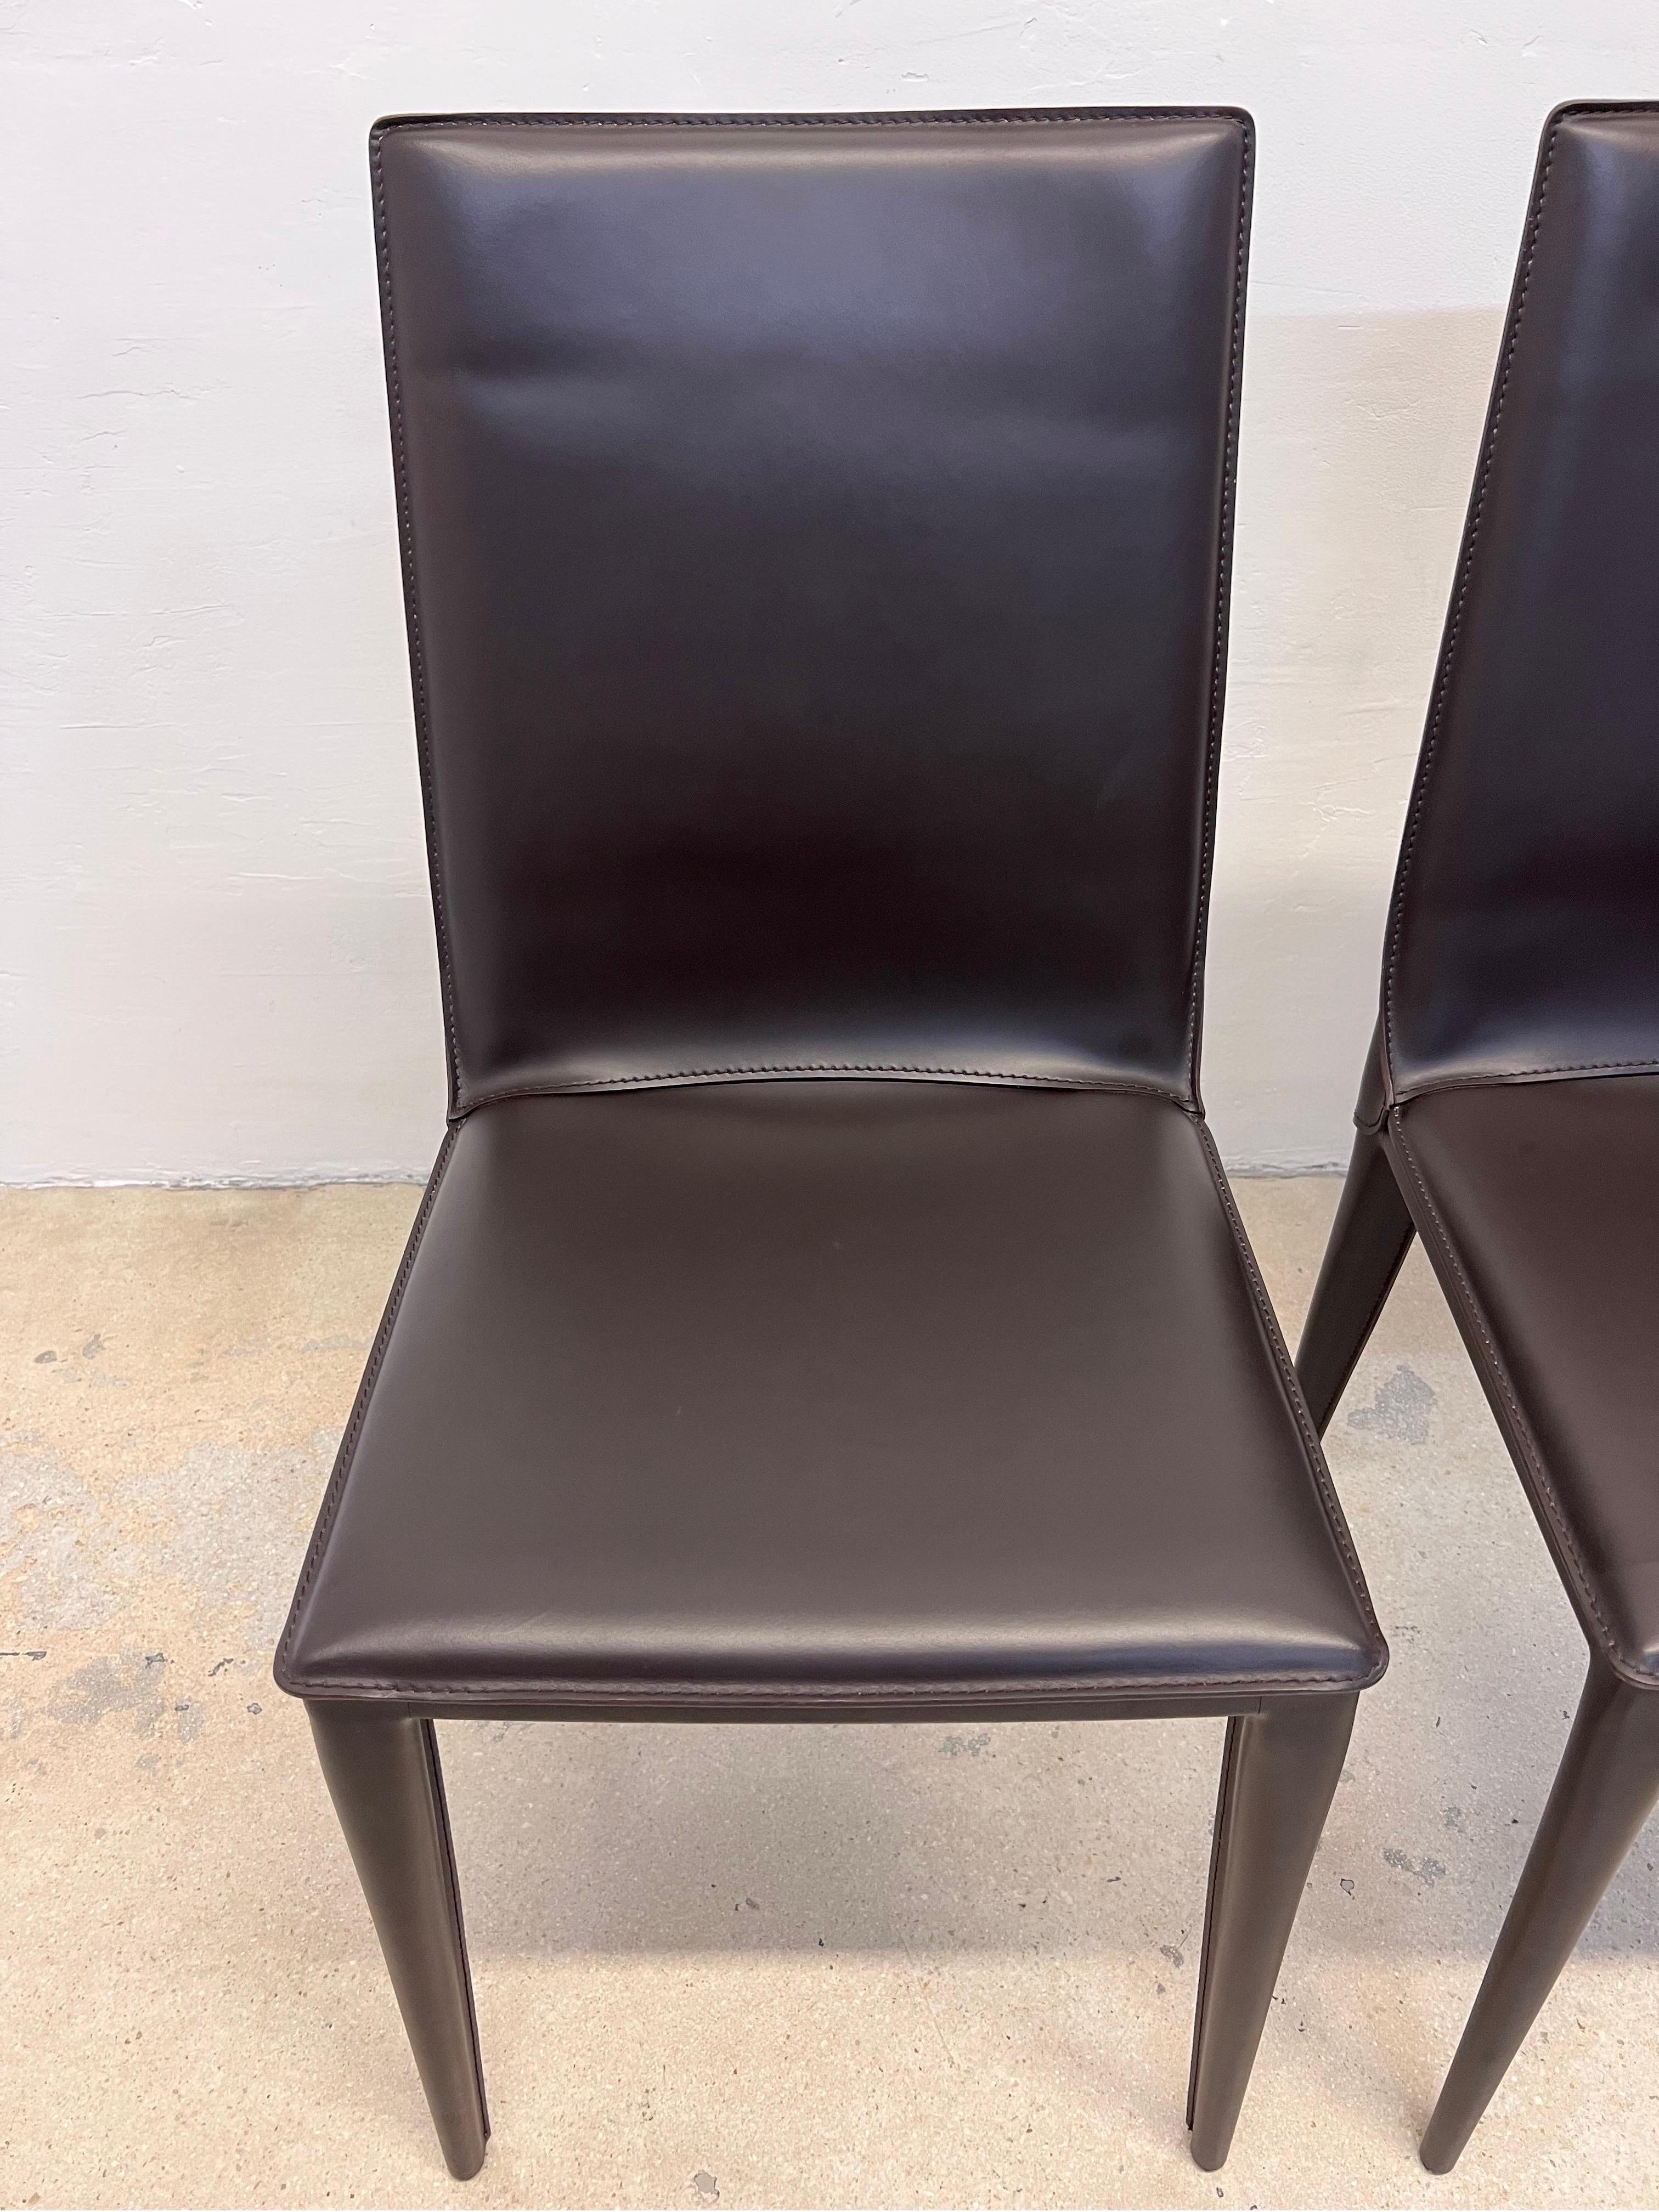 Contemporary Bottega Leather Dining Chairs by Fauciglietti and Bianchi for DWR, Pair For Sale